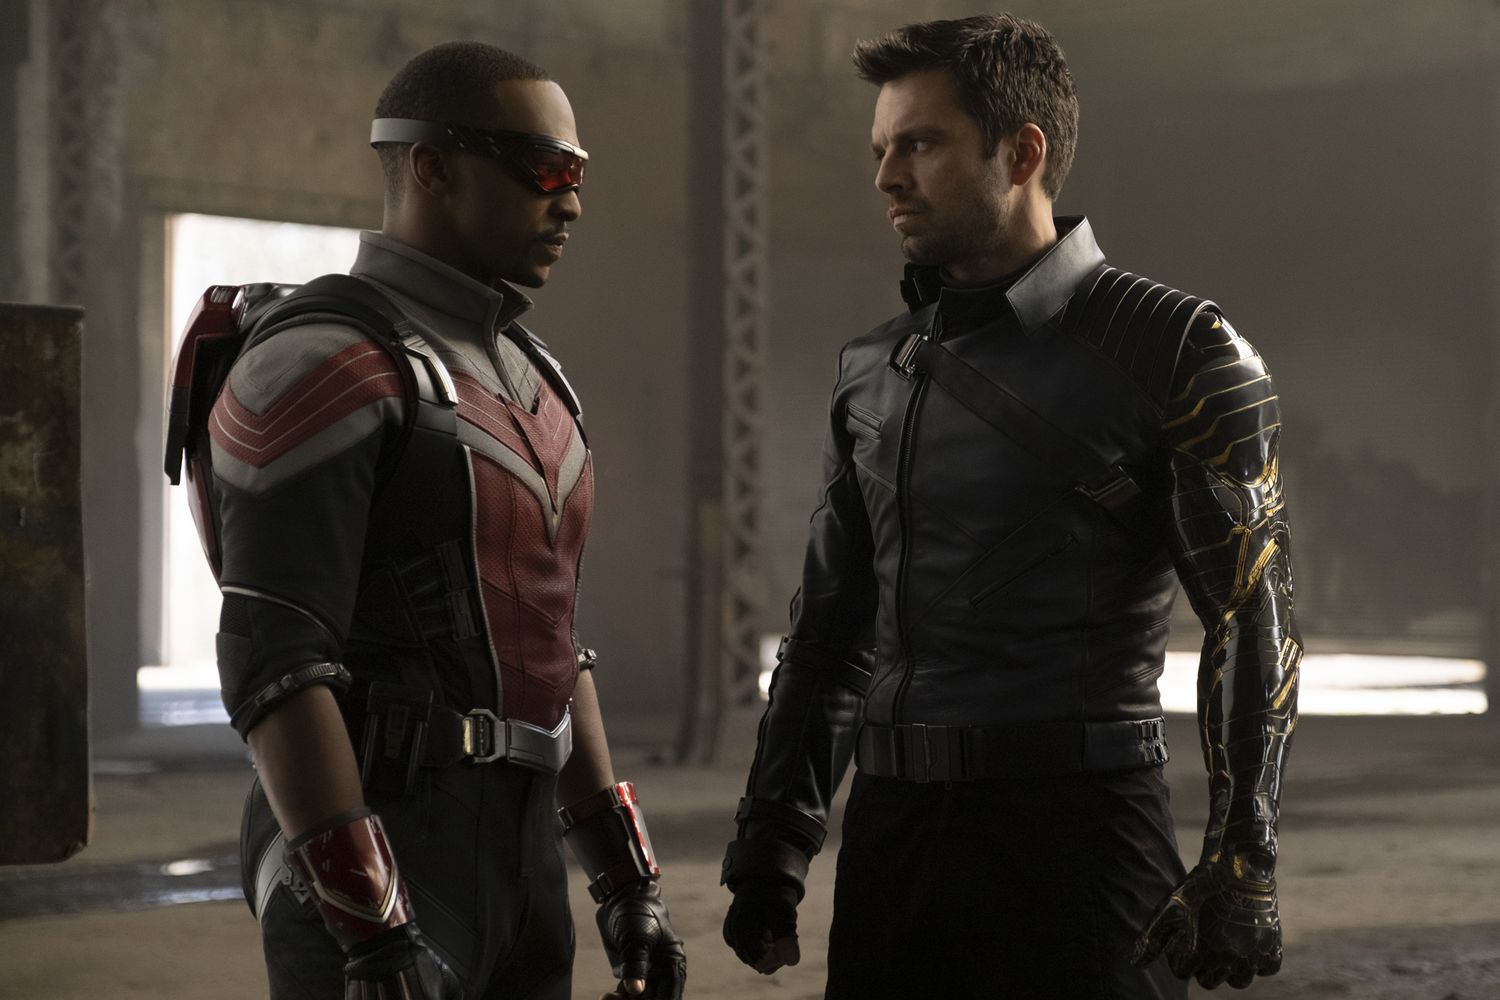 Anthony Mackie as Sam Wilson/Falcon and Sebastian Stan as Bucky Barnes/Winter Soldier on 'The Falcon and the Winter Soldier'